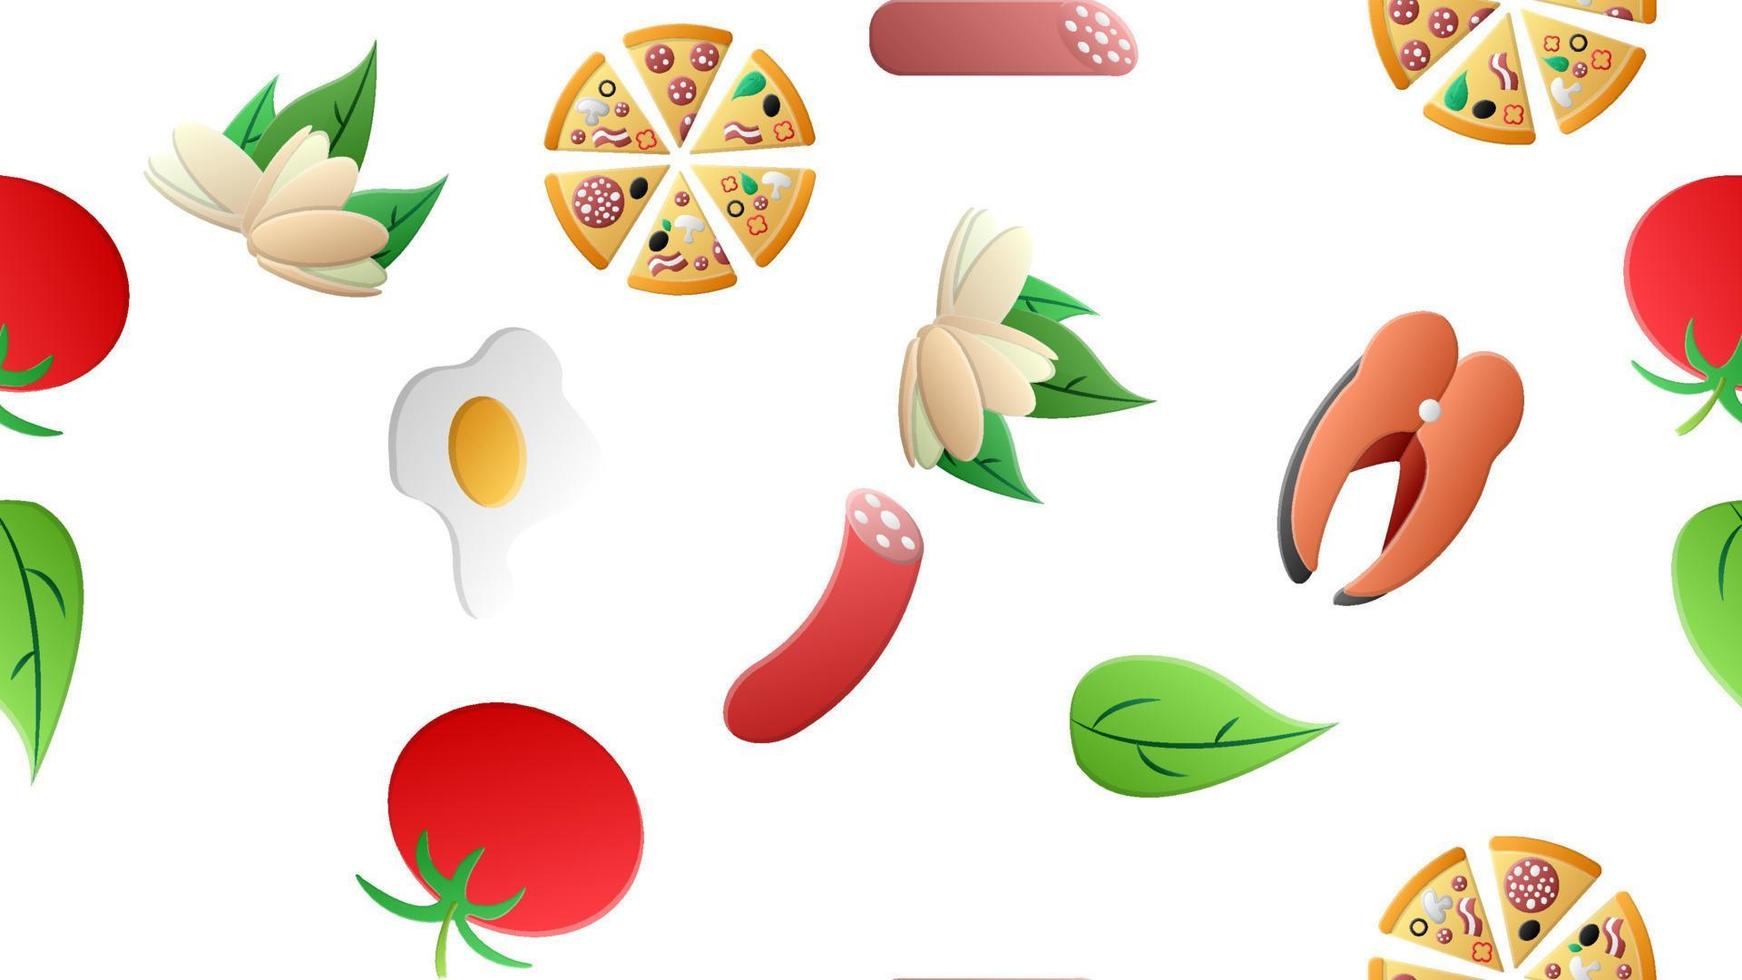 Endless white seamless pattern from a set of icons of delicious food and snacks items for a restaurant bar cafe pizza, pistachios, fish, salami, tomatoes, herbs, egg. The background vector